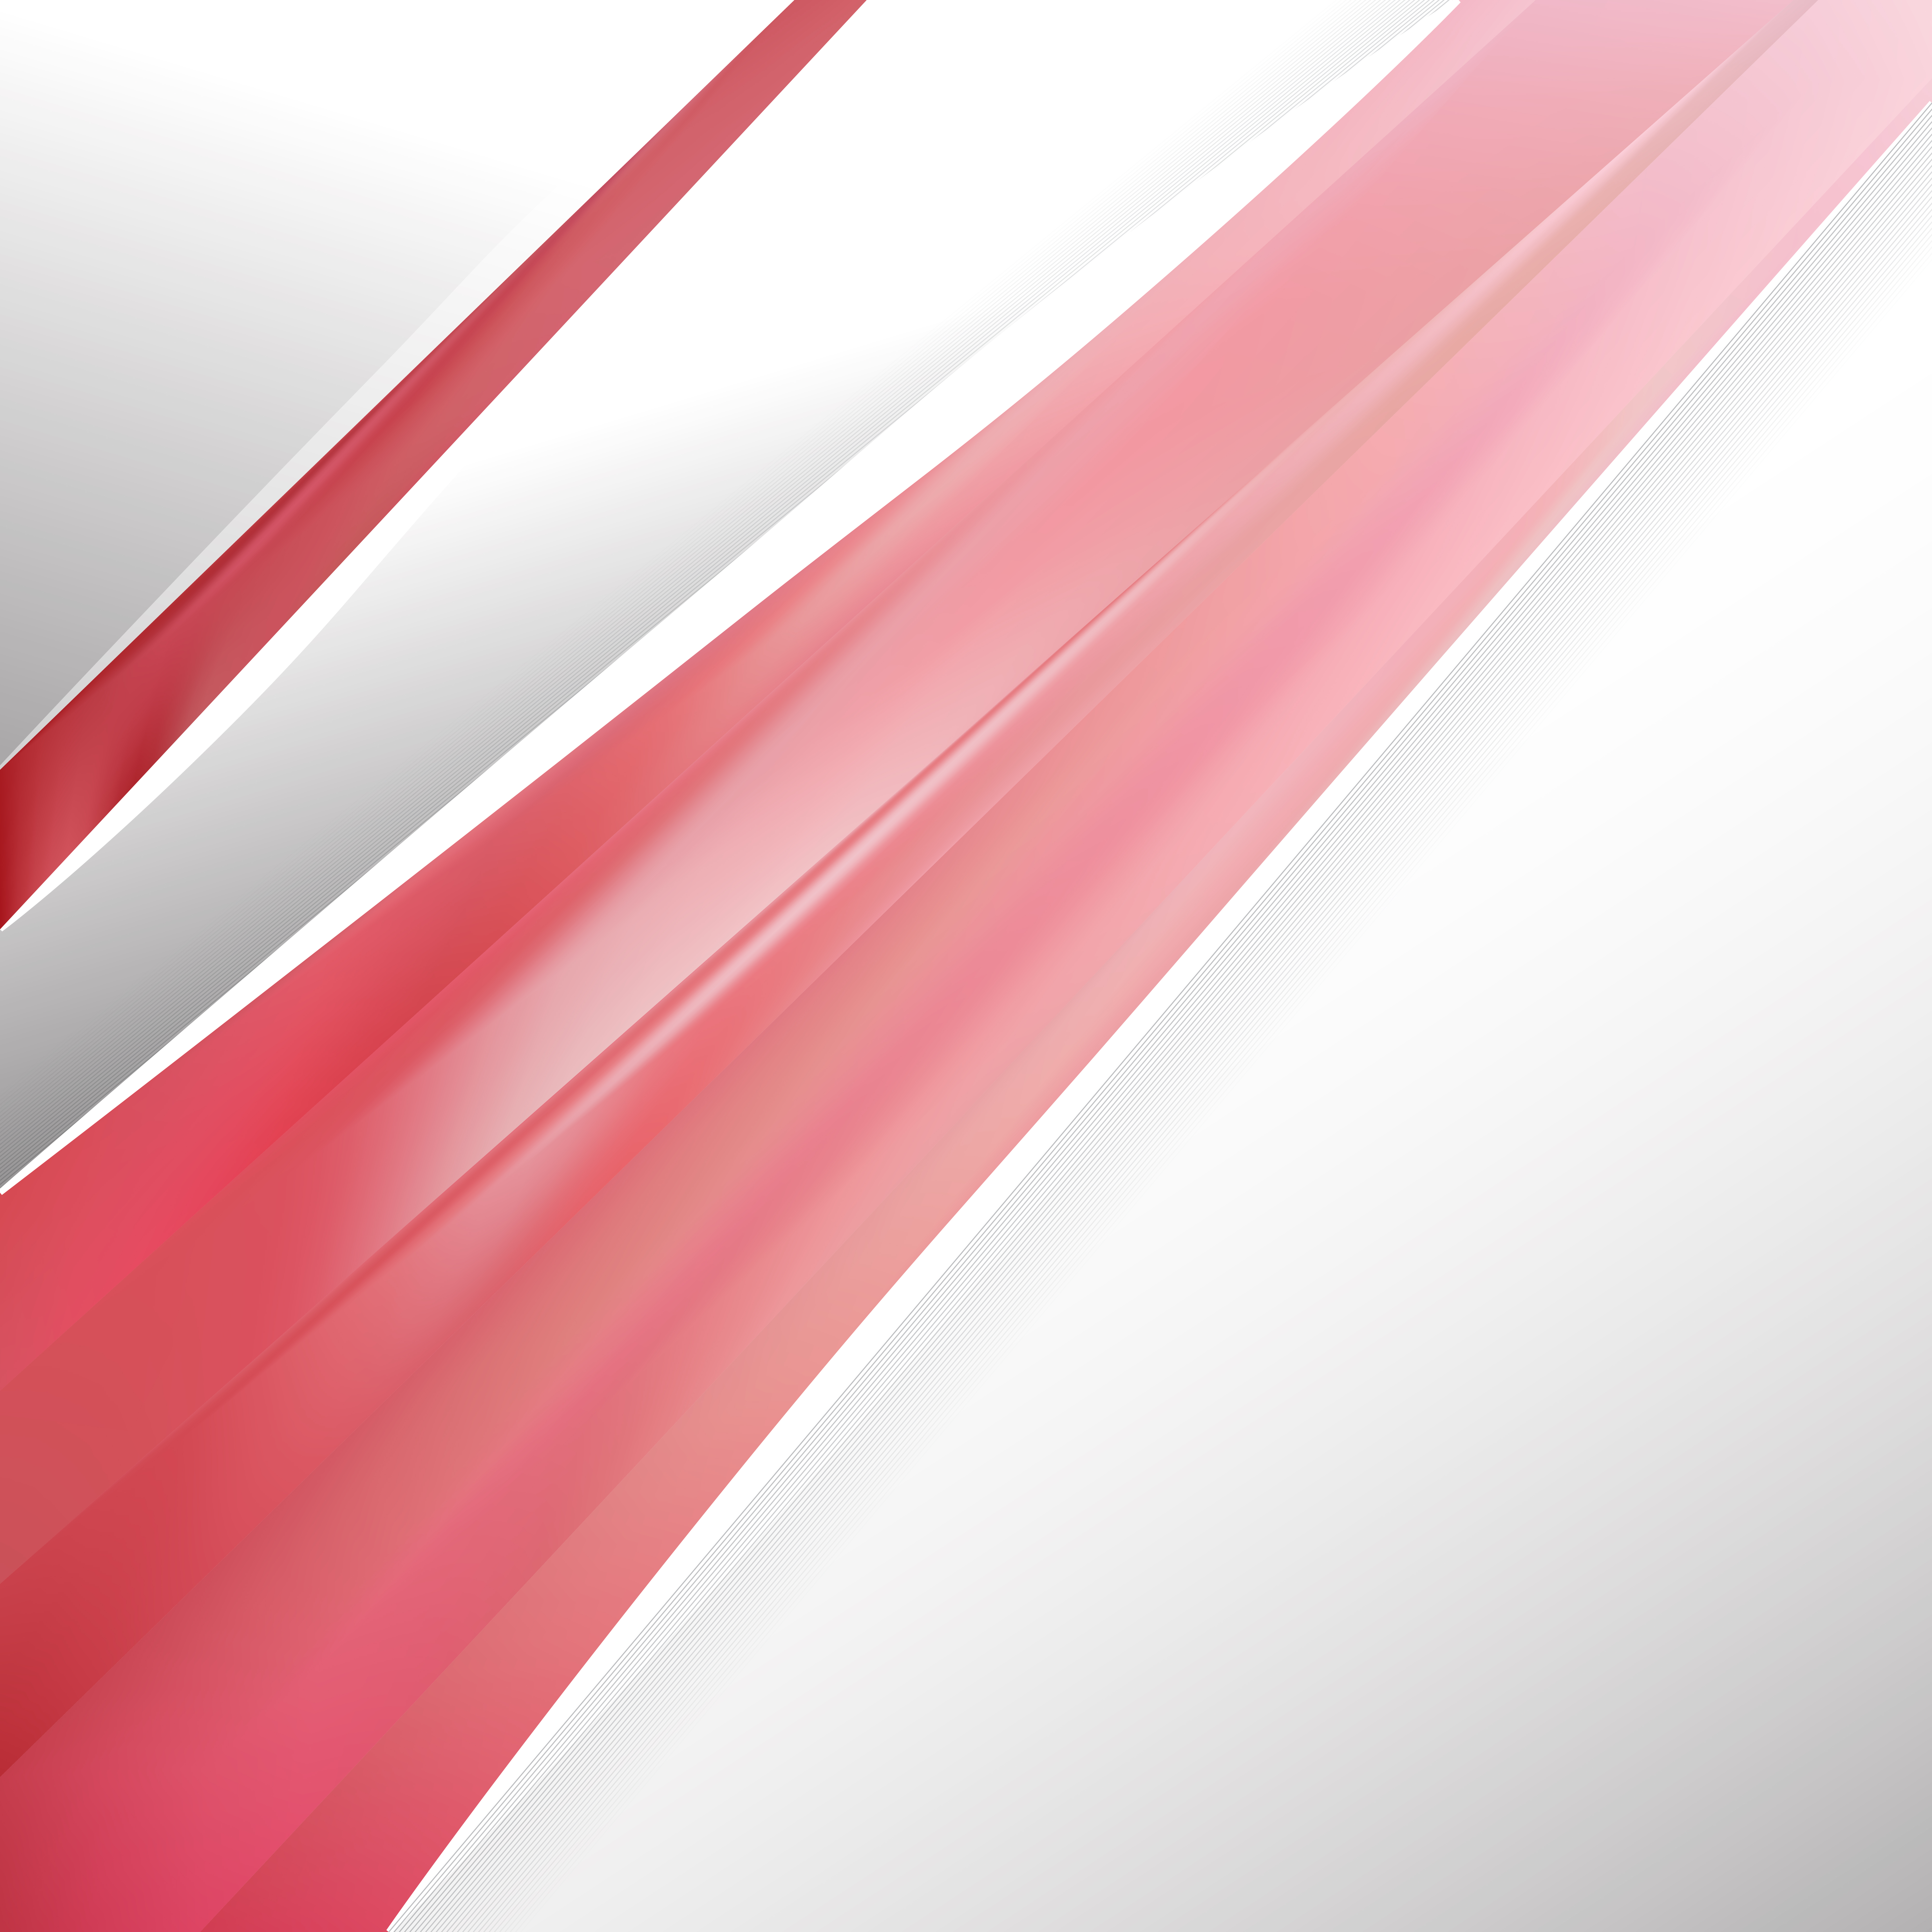 Free Abstract Light Red Business Background Illustration